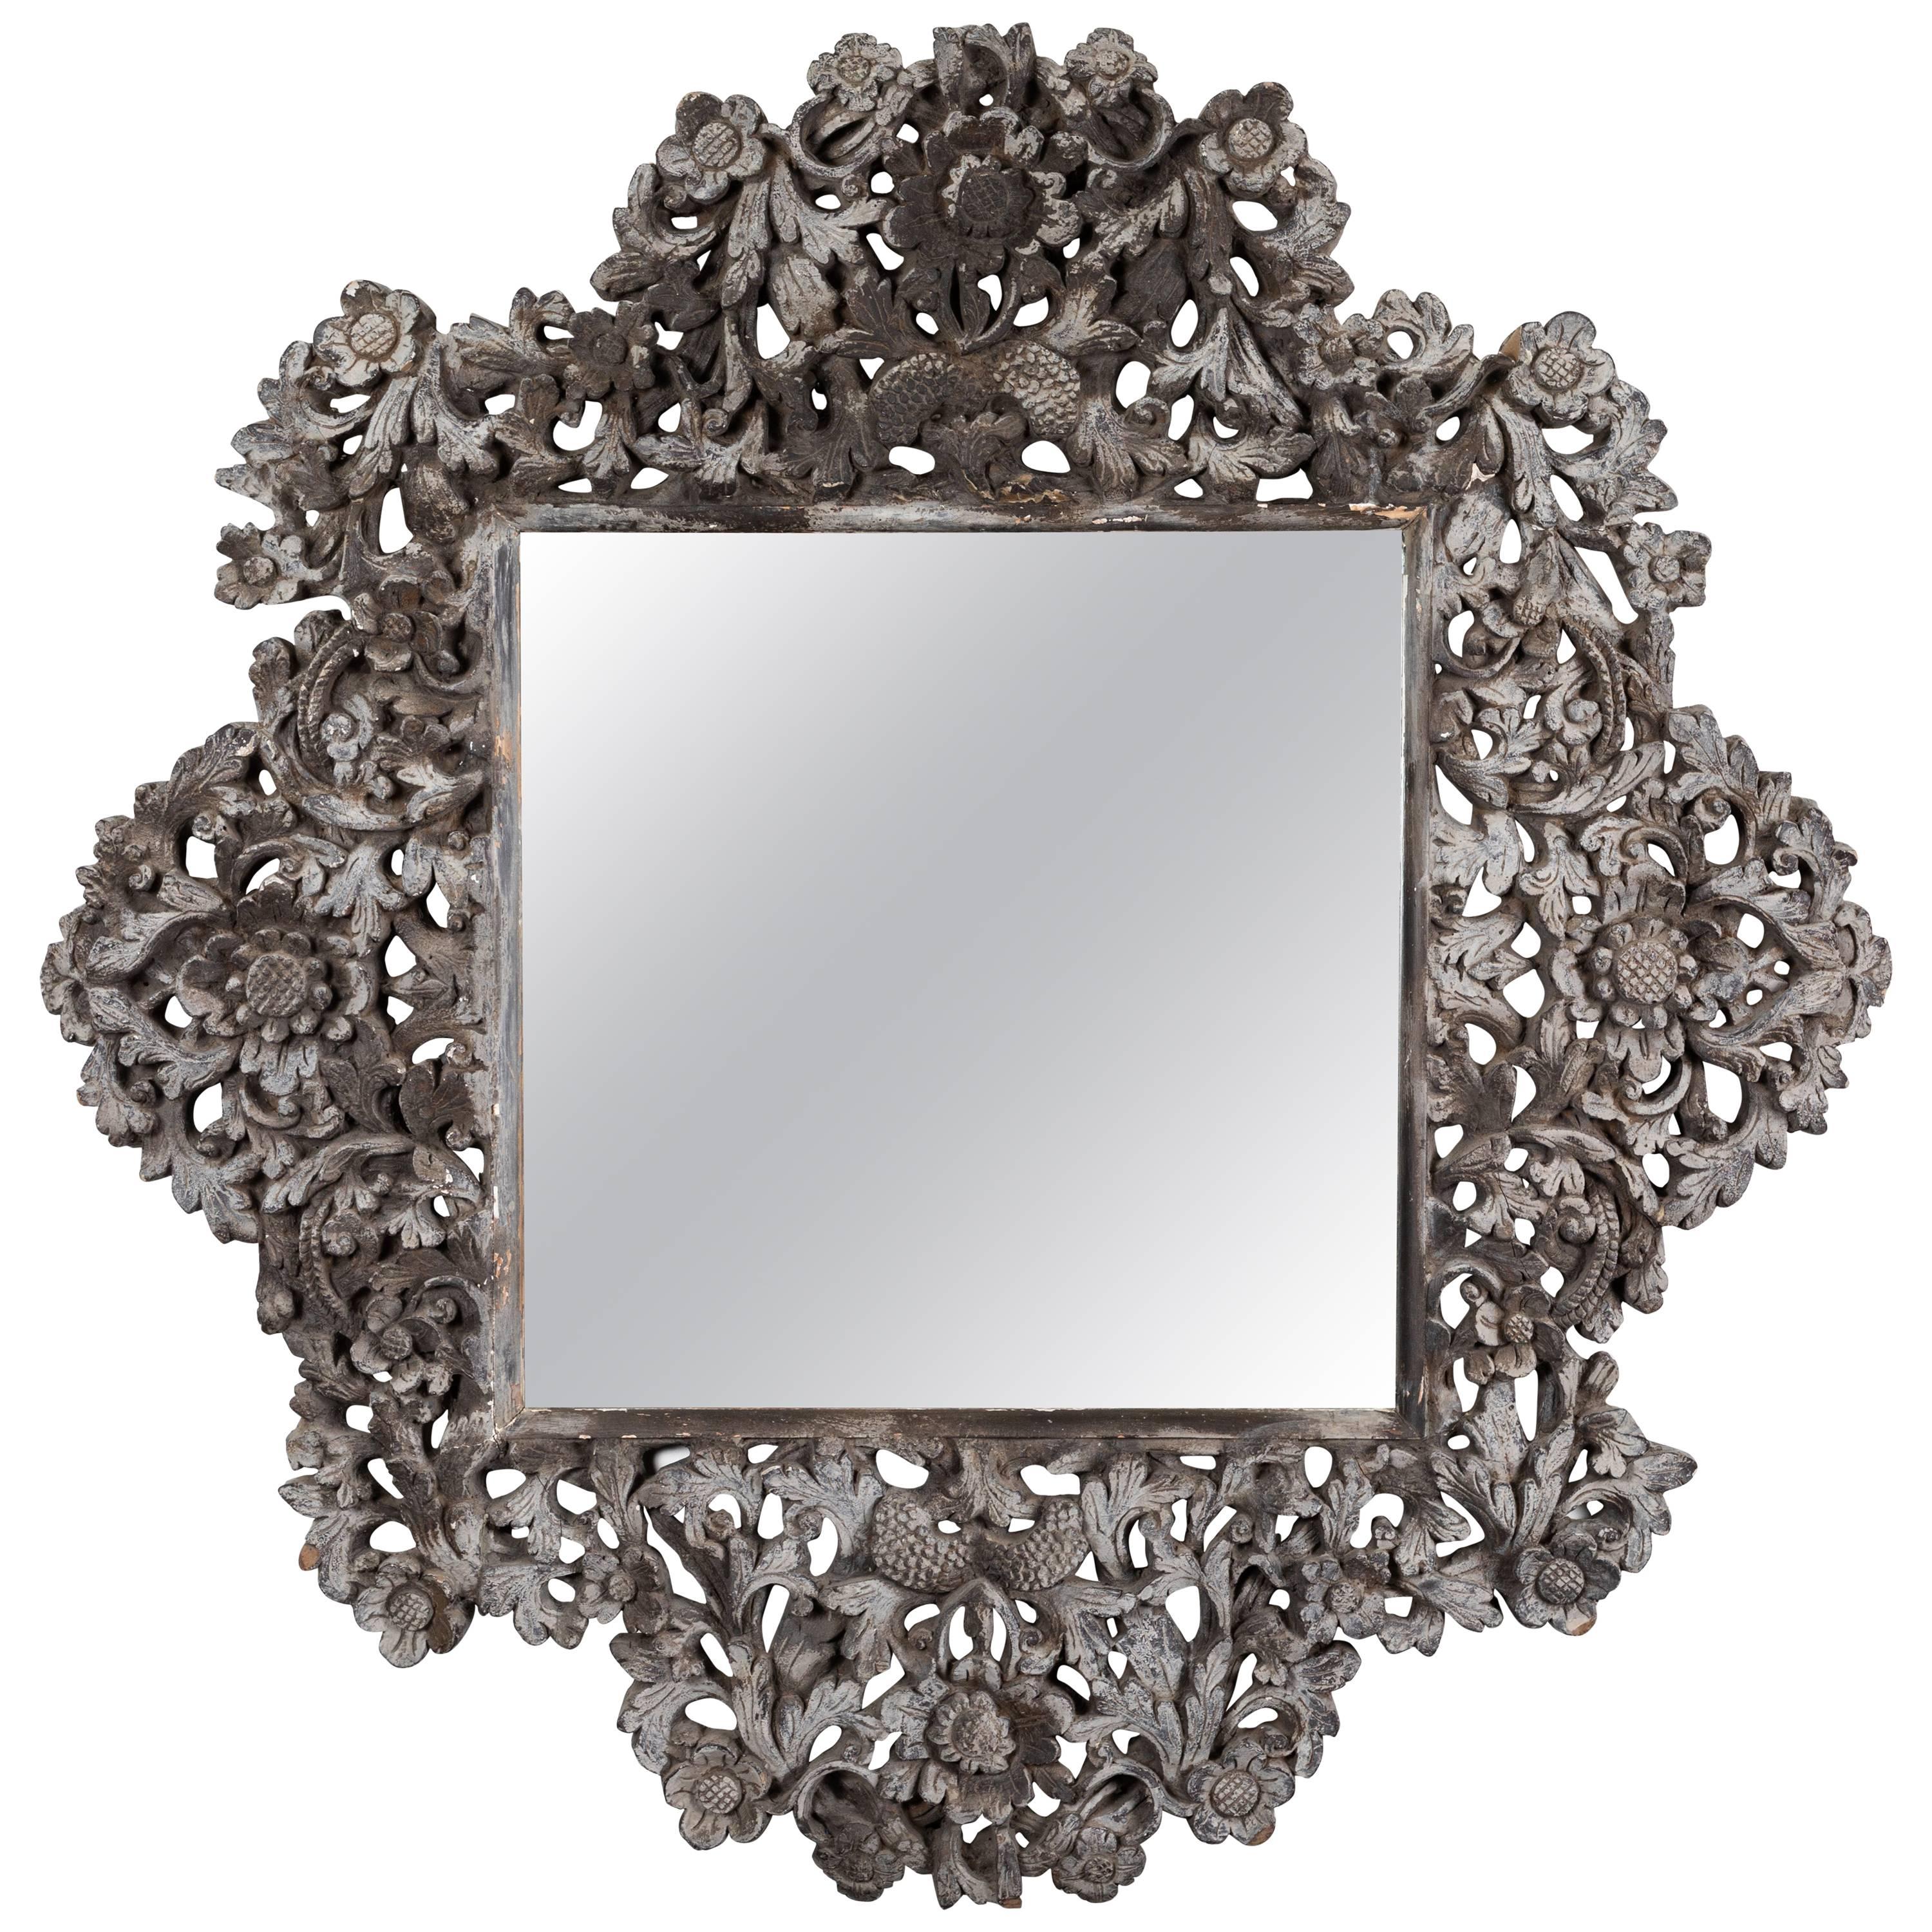 Vintage Spanish Colonial Style Mirror by Tony Duquette